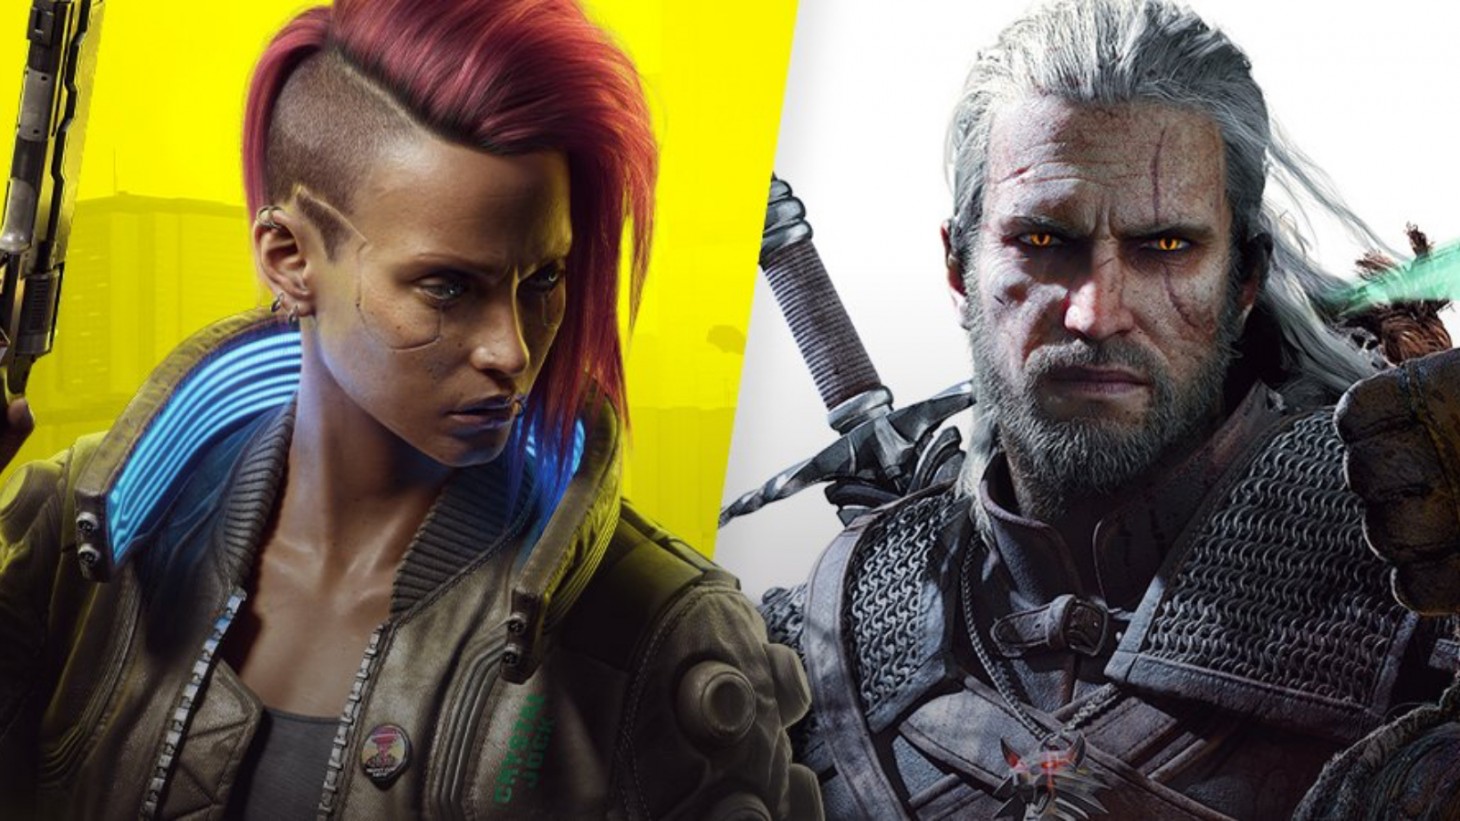 CD Projekt Red Announces New Informer Cyberpunk Games, New - Witcher Game, Multiple IP Game And